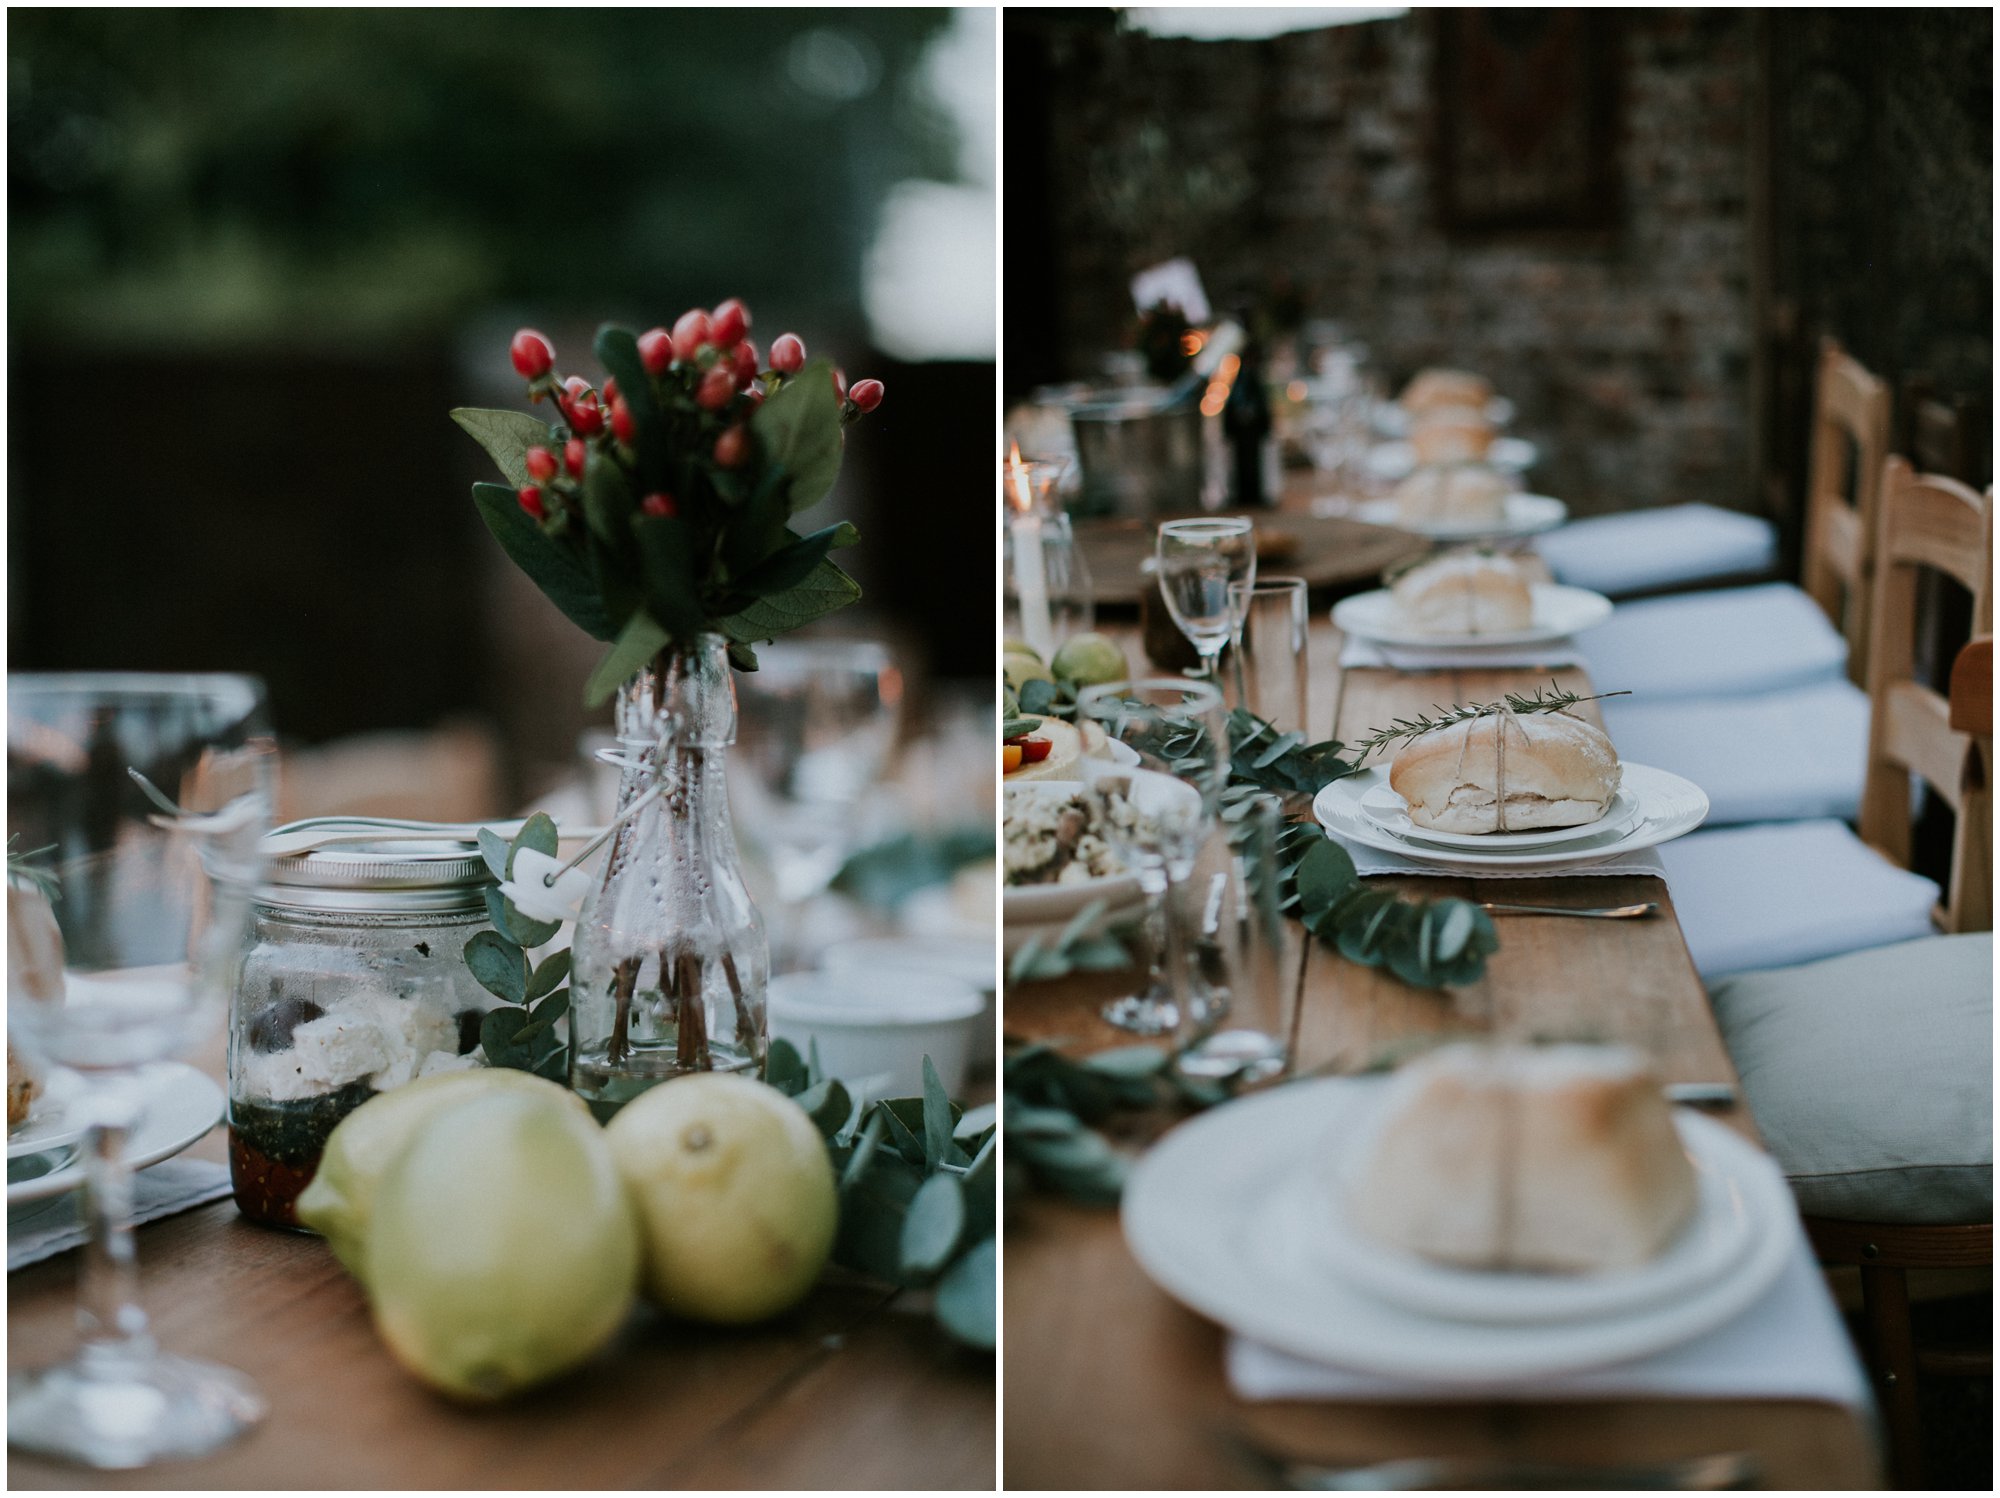 Decor for Outdoor Bohemian Destination Wedding at Francine’s Venue in Hoedspruit Limpopo by Junebug World's Best Photographer Maryke Albertyn Award Winning International Alternative Moody Photography based in Cape Town South Africa